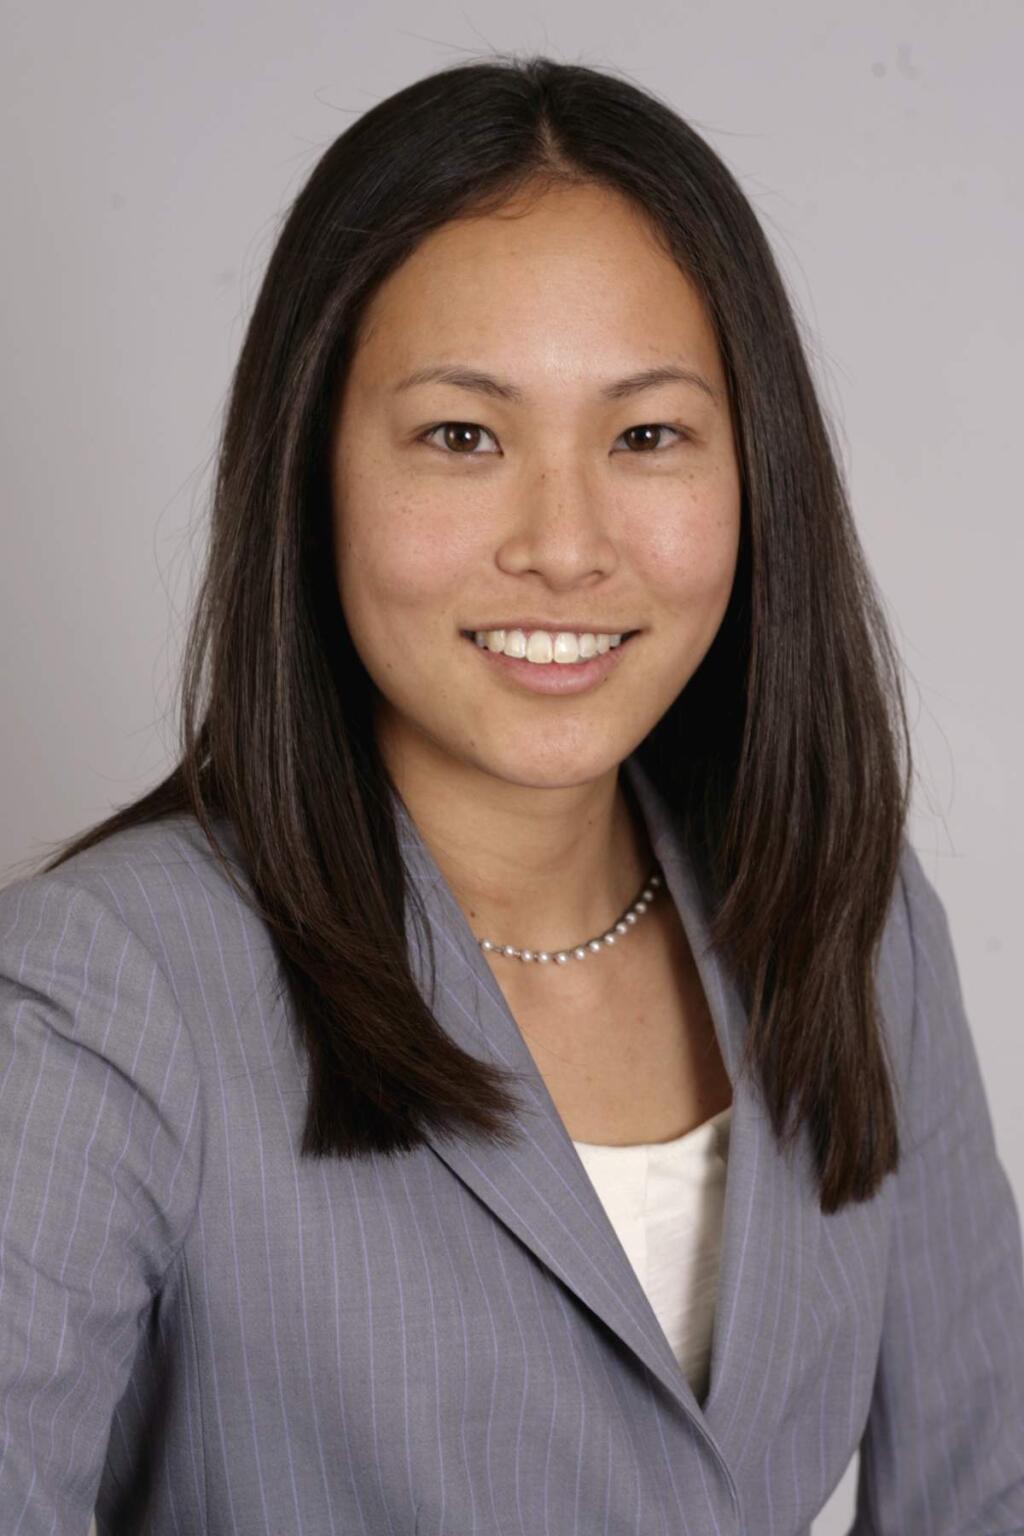 Kelly Matayoshi is an associate in the Employment and Business Litigation groups at Farella Braun + Martel, which has San Francisco and St. Helena offices.